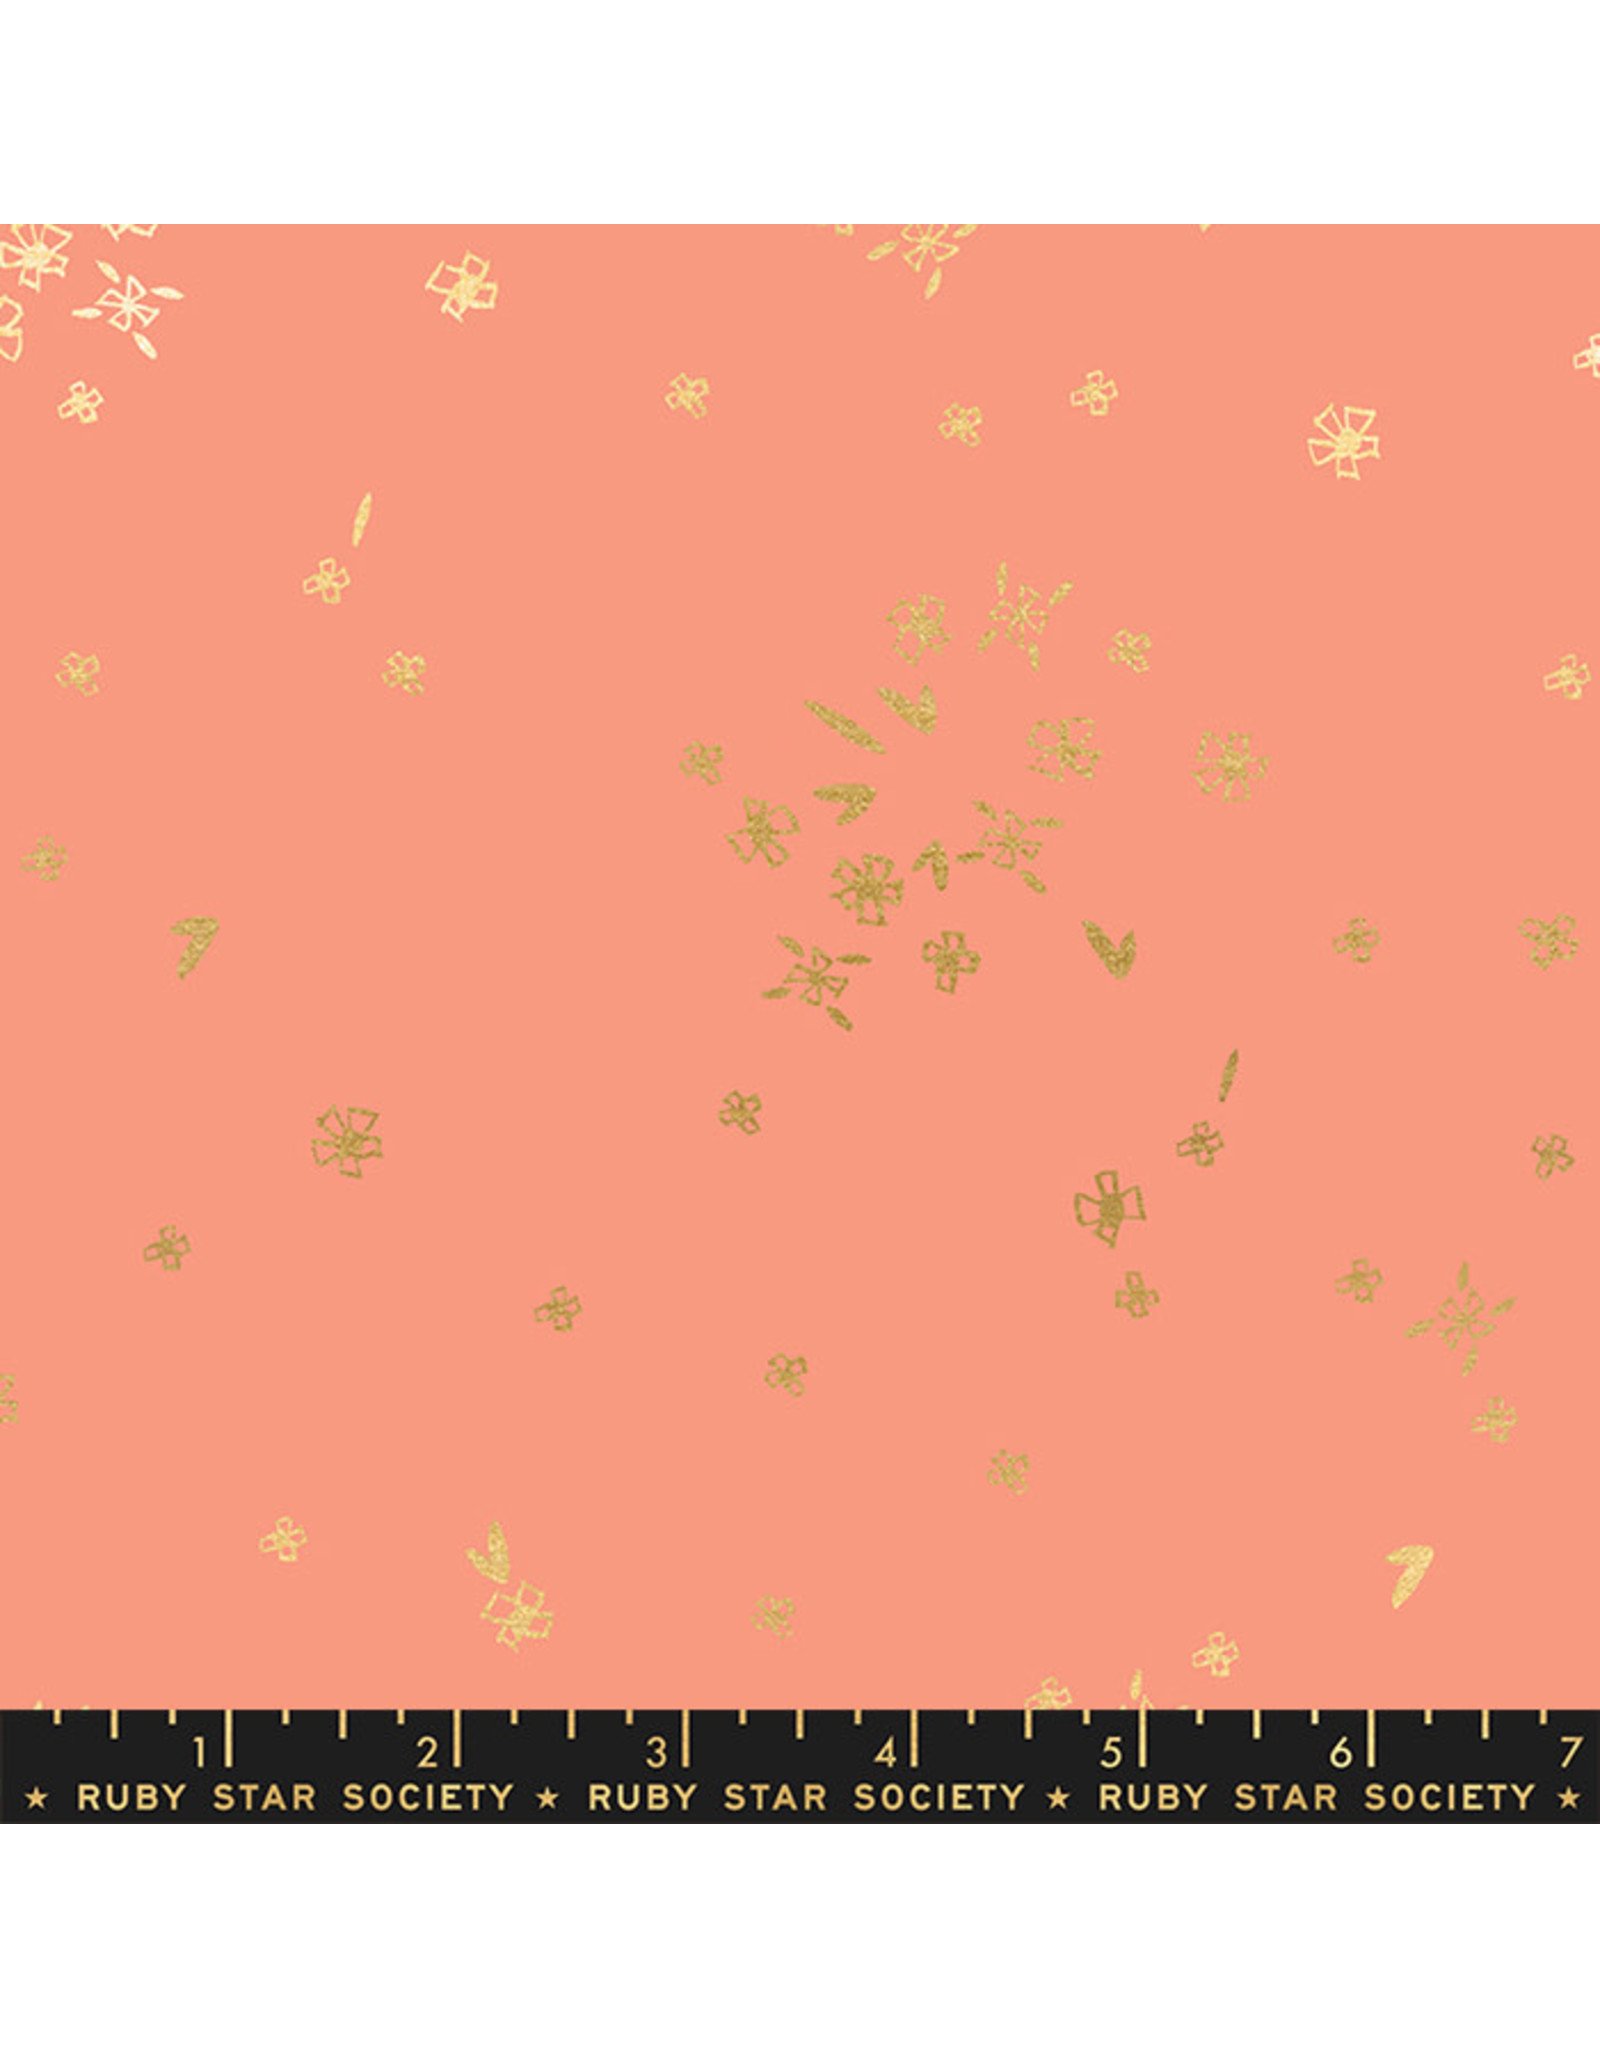 Ruby Star Society for Moda First Light, Tiny Flowers in Melon with Metallic, Fabric Half-Yards